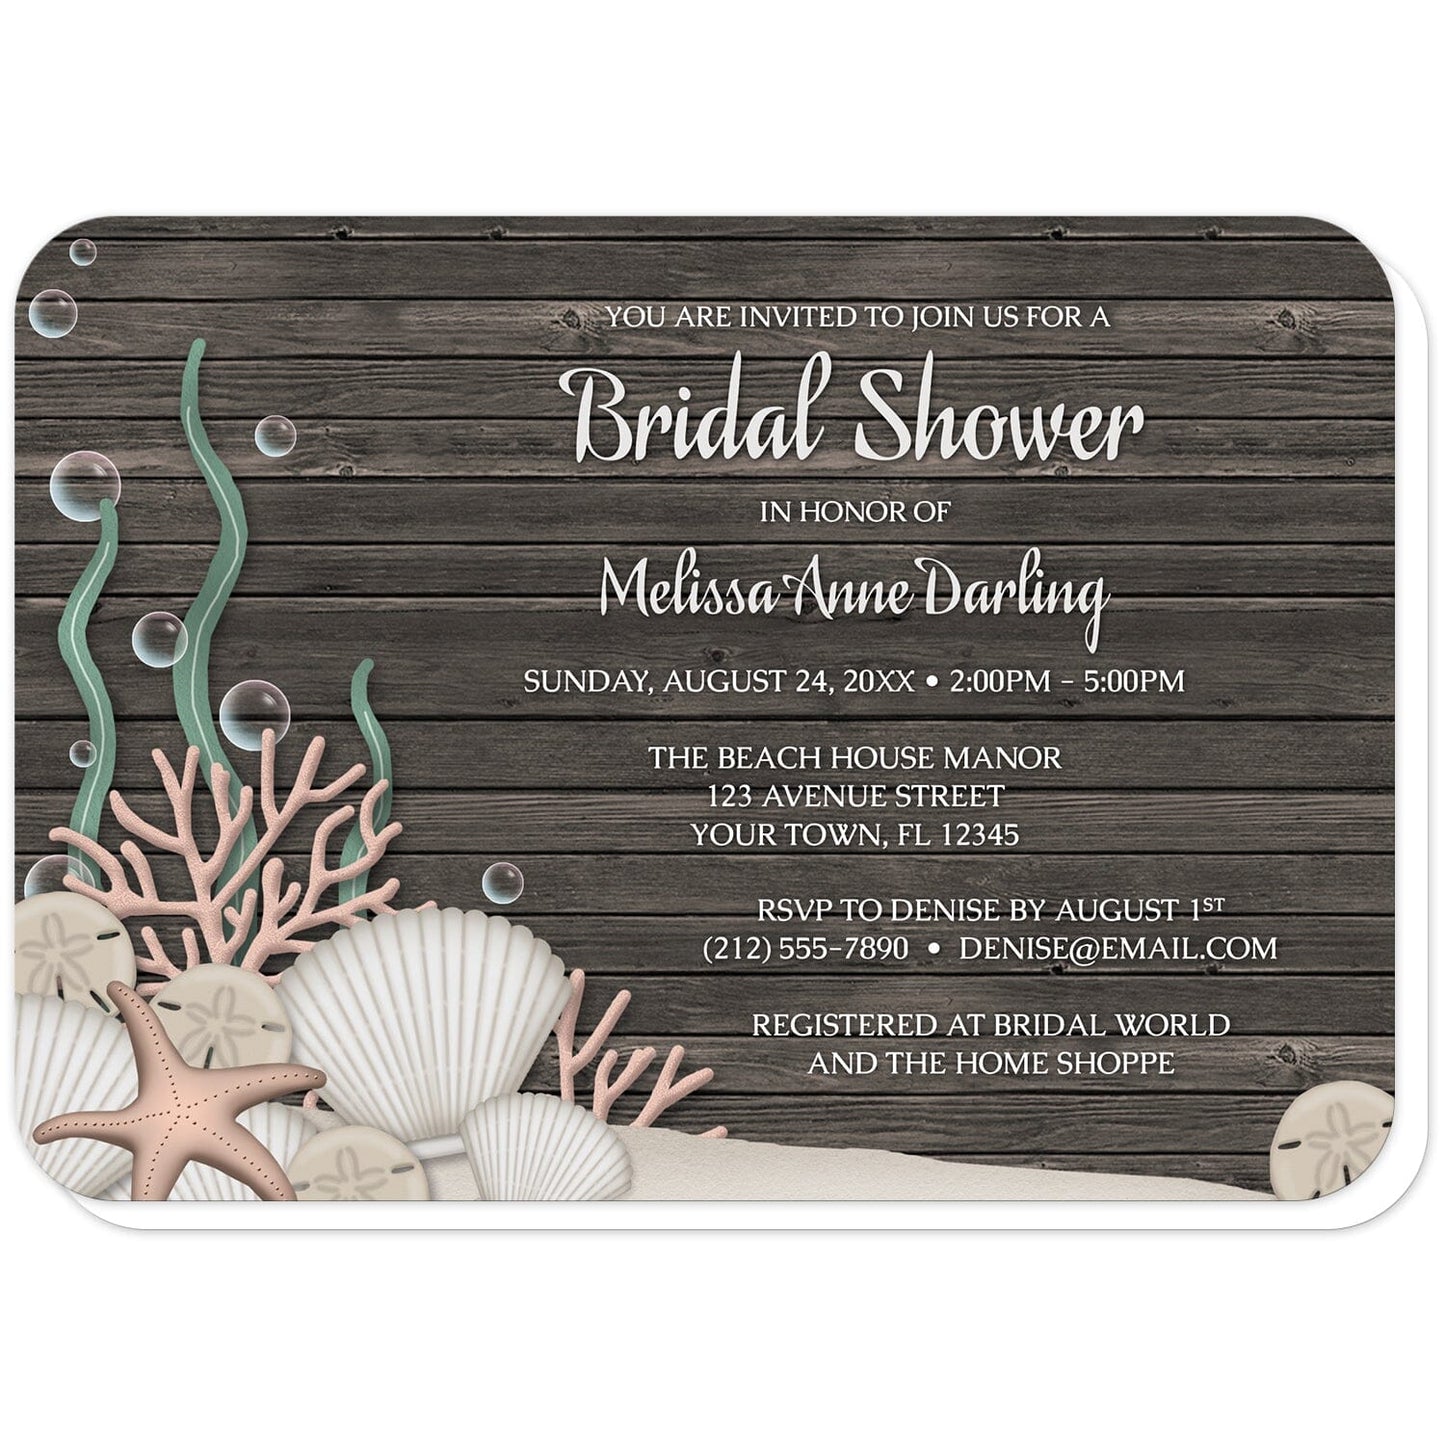 Rustic Beach Seashells and Wood Bridal Shower Invitations (with rounded corners) at Artistically Invited. Rustic beach seashells and wood bridal shower invitations with a rustic "on the beach" or "under the sea" theme. They are designed with a dark wood pattern, sandy seabed, assorted seashells, coral, and kelp. Your personalized bridal shower celebration details are custom printed in white over the wood background.